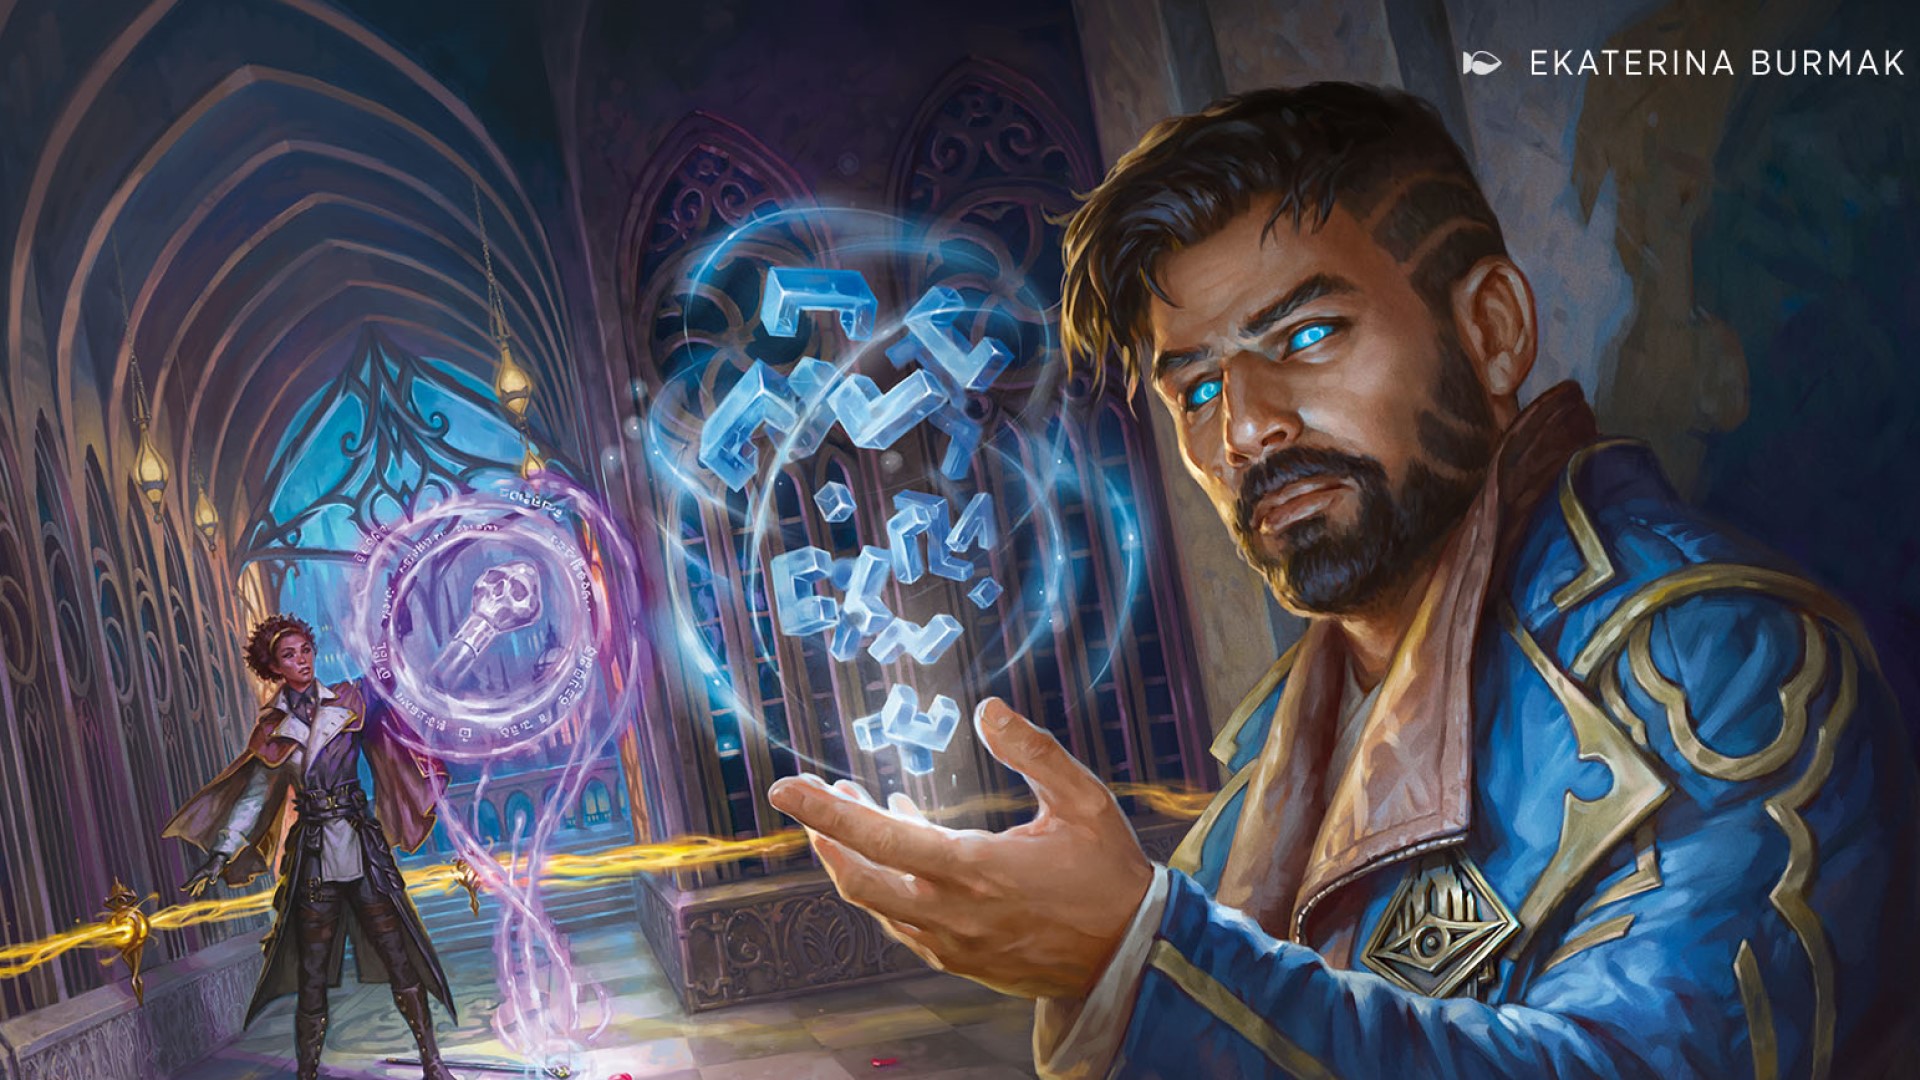 Art from Murders at Karlov Manor, an upcoming Magic: The Gathering set. Illustrated by Ekaterina Burmak.